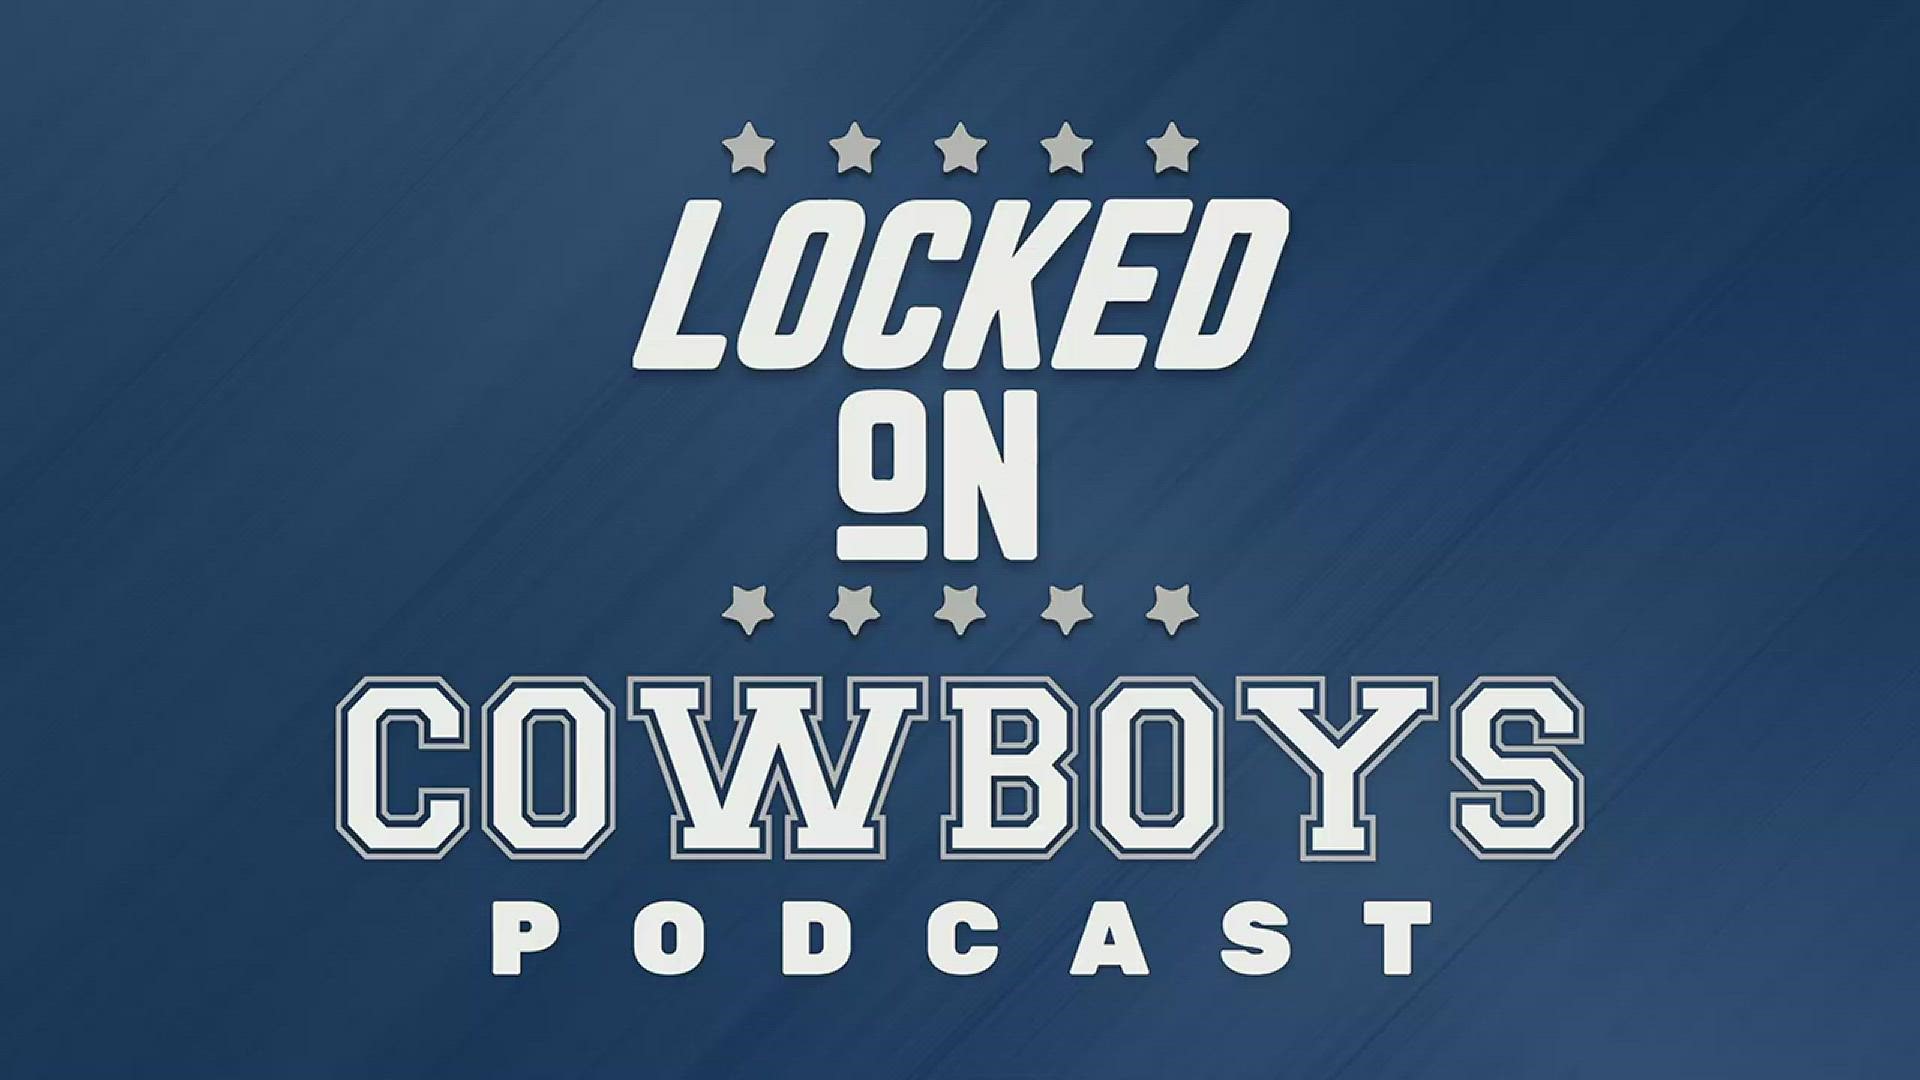 Marcus Mosher is joined by Connor Livesay (@ConnorNFLDraft) to discuss the news that the Dallas Cowboys are expected to start rookie WR Jalen Tolbert in Week 1.